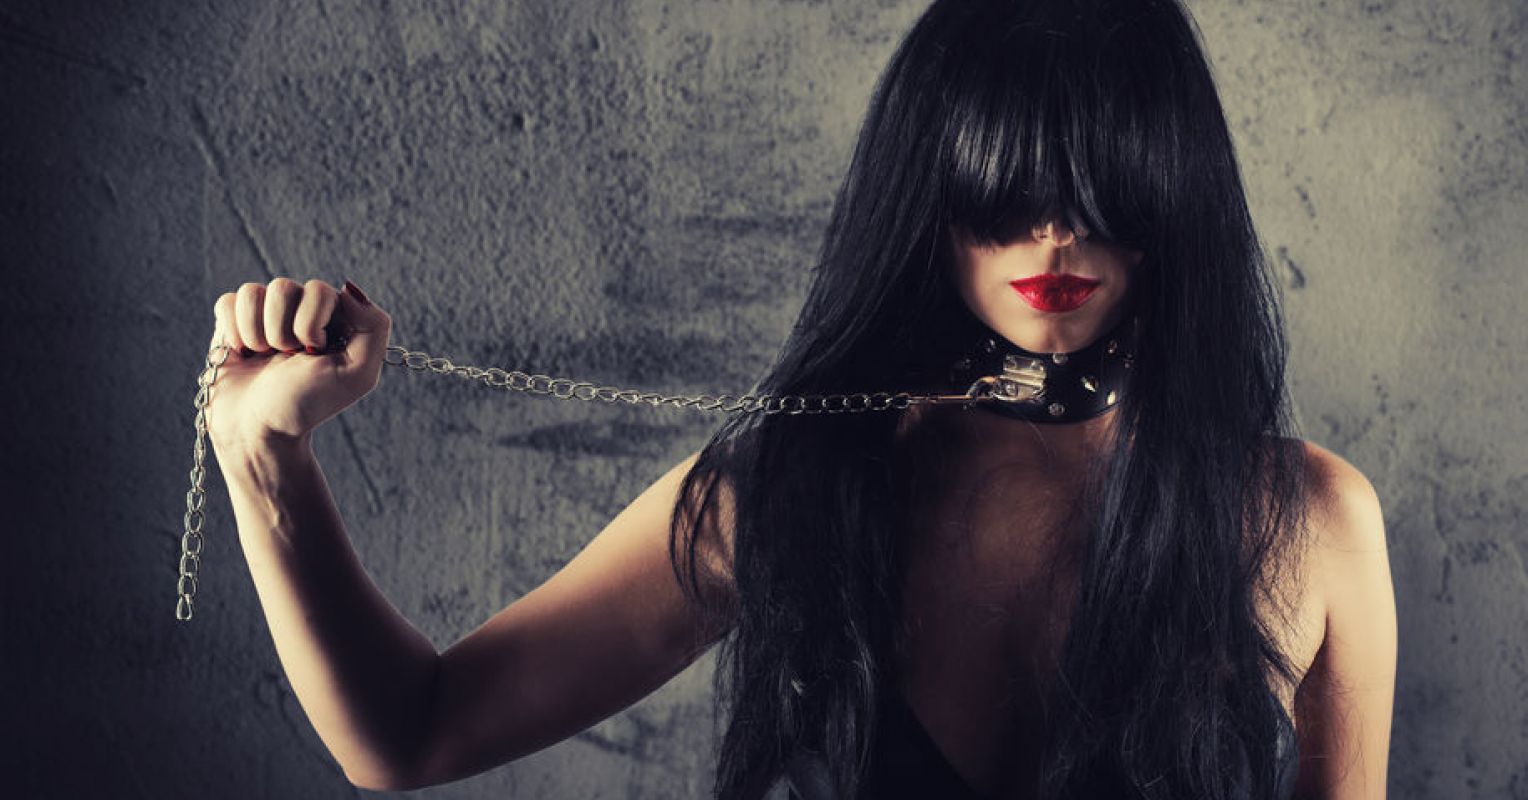 Is BDSM/Kink a Hobby or a Sexual Orientation? Psychology Today photo